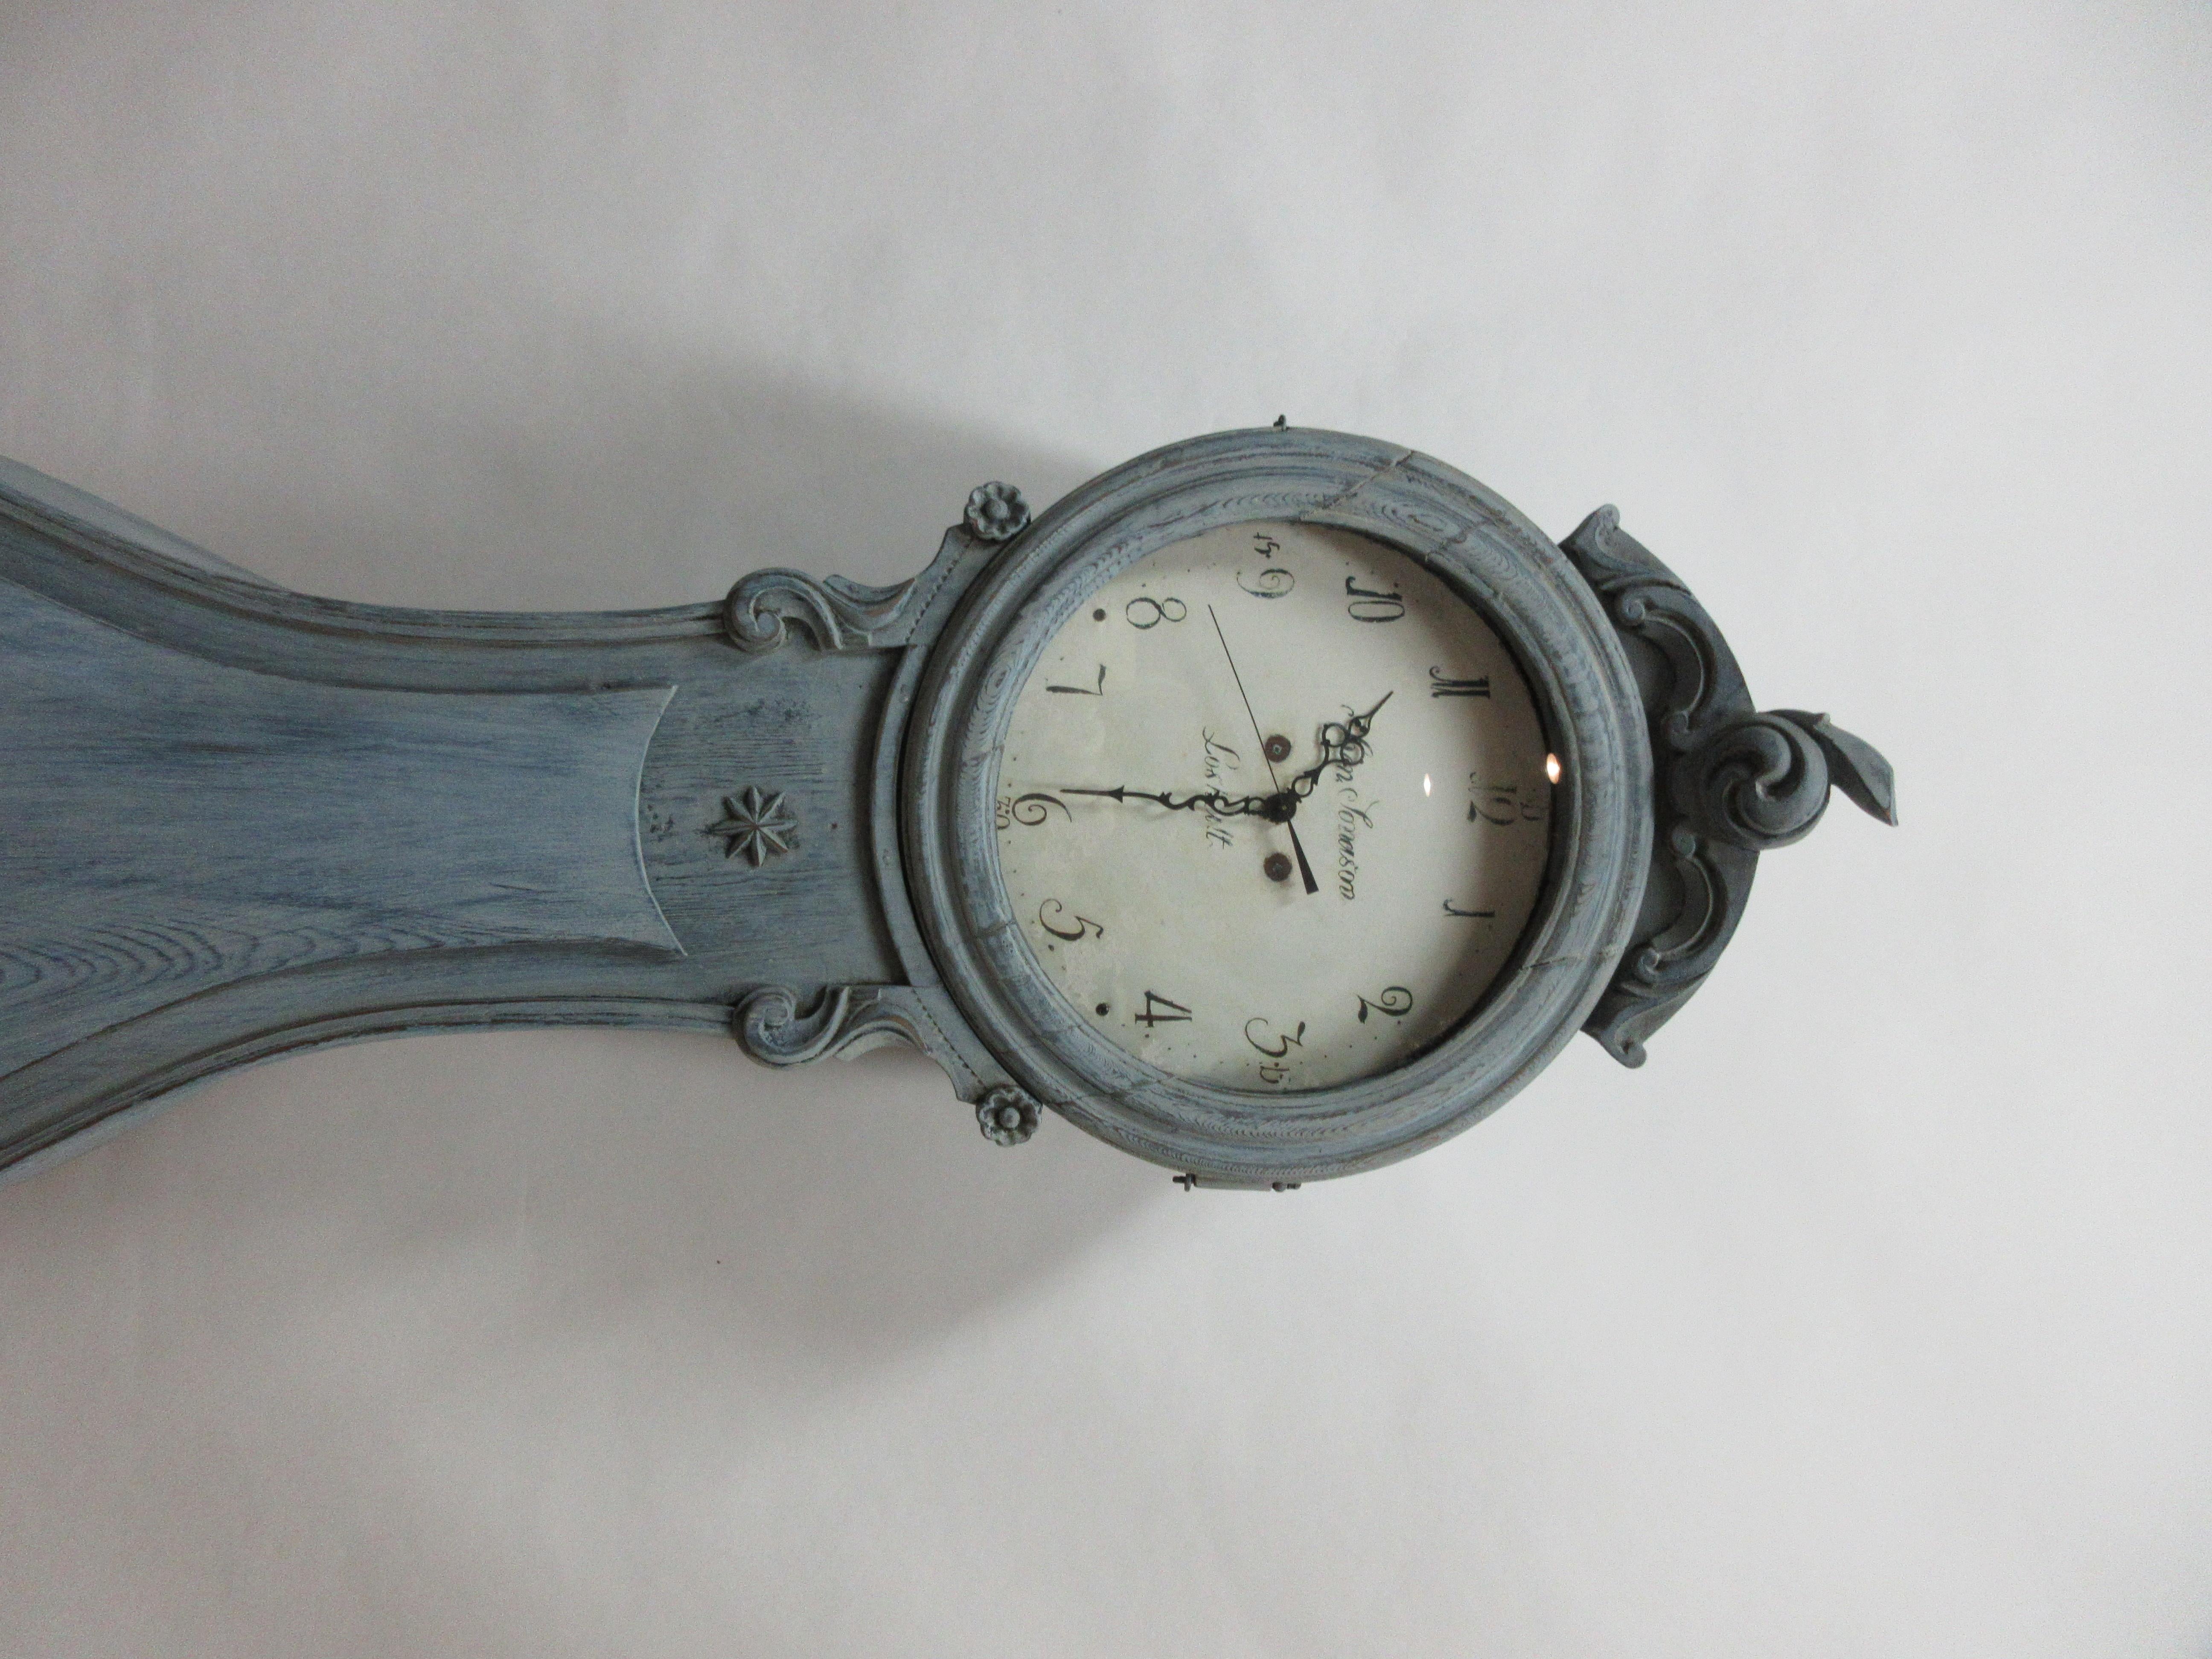 This is a blue Swedish Mora clock, its been restored and repainted with 